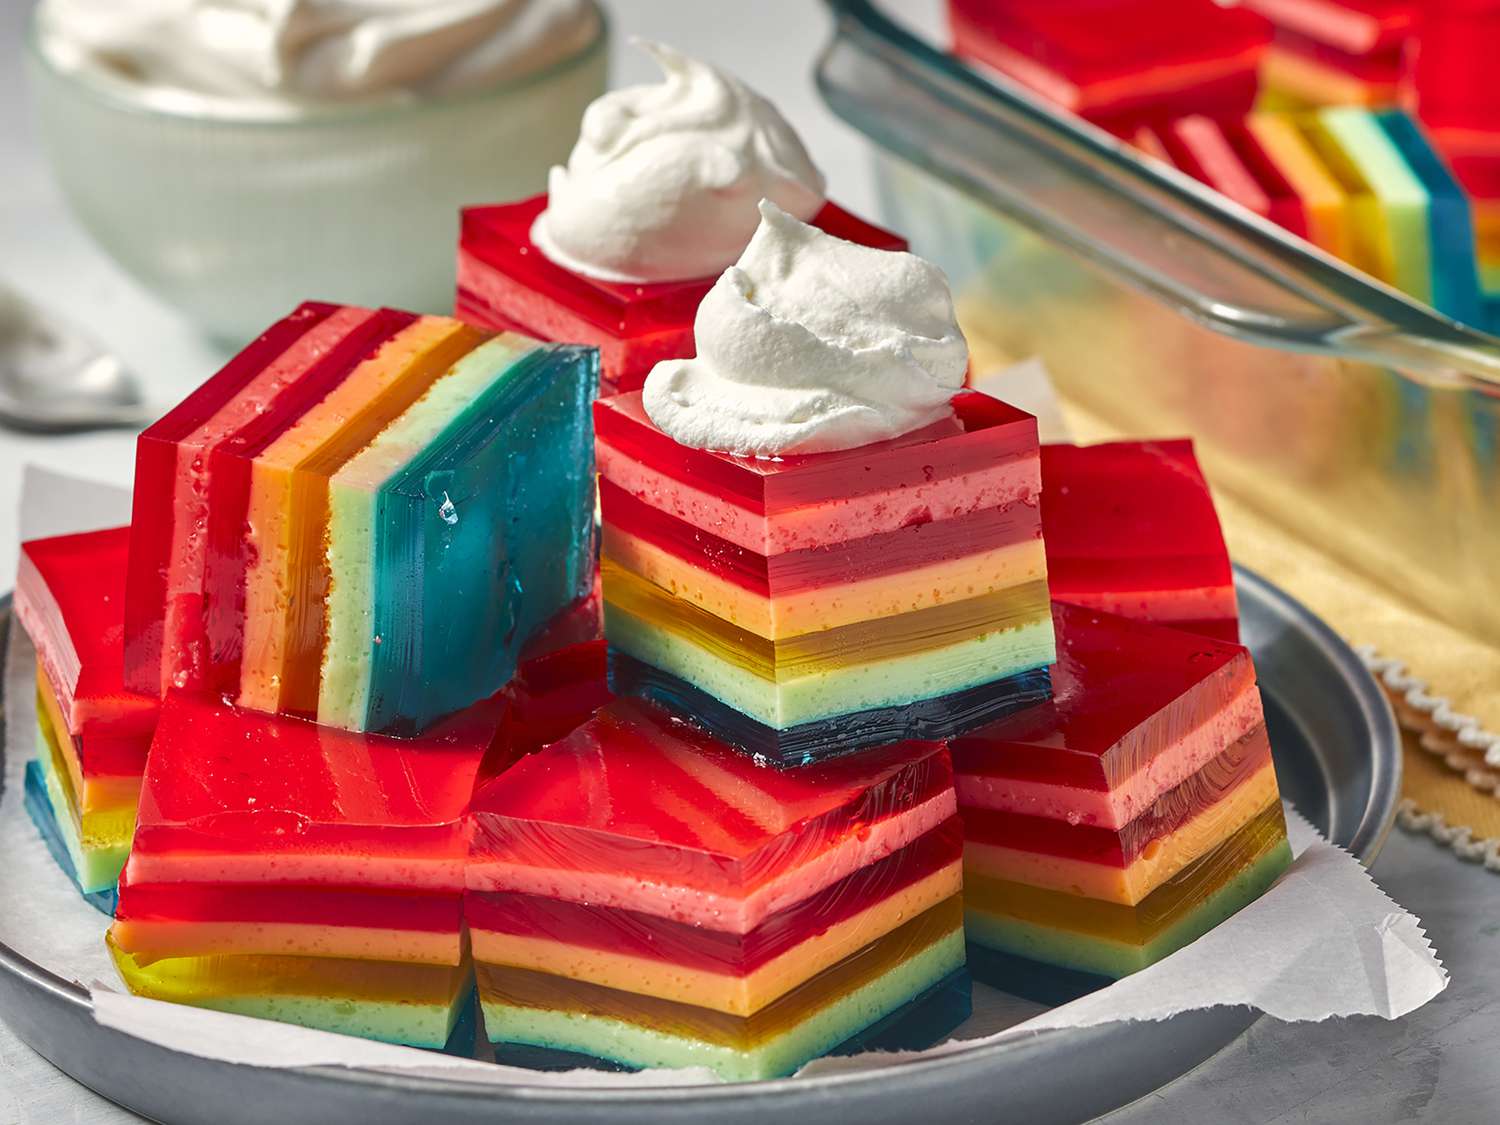 6-unexpected-factors-that-can-ruin-your-gelatin-desserts